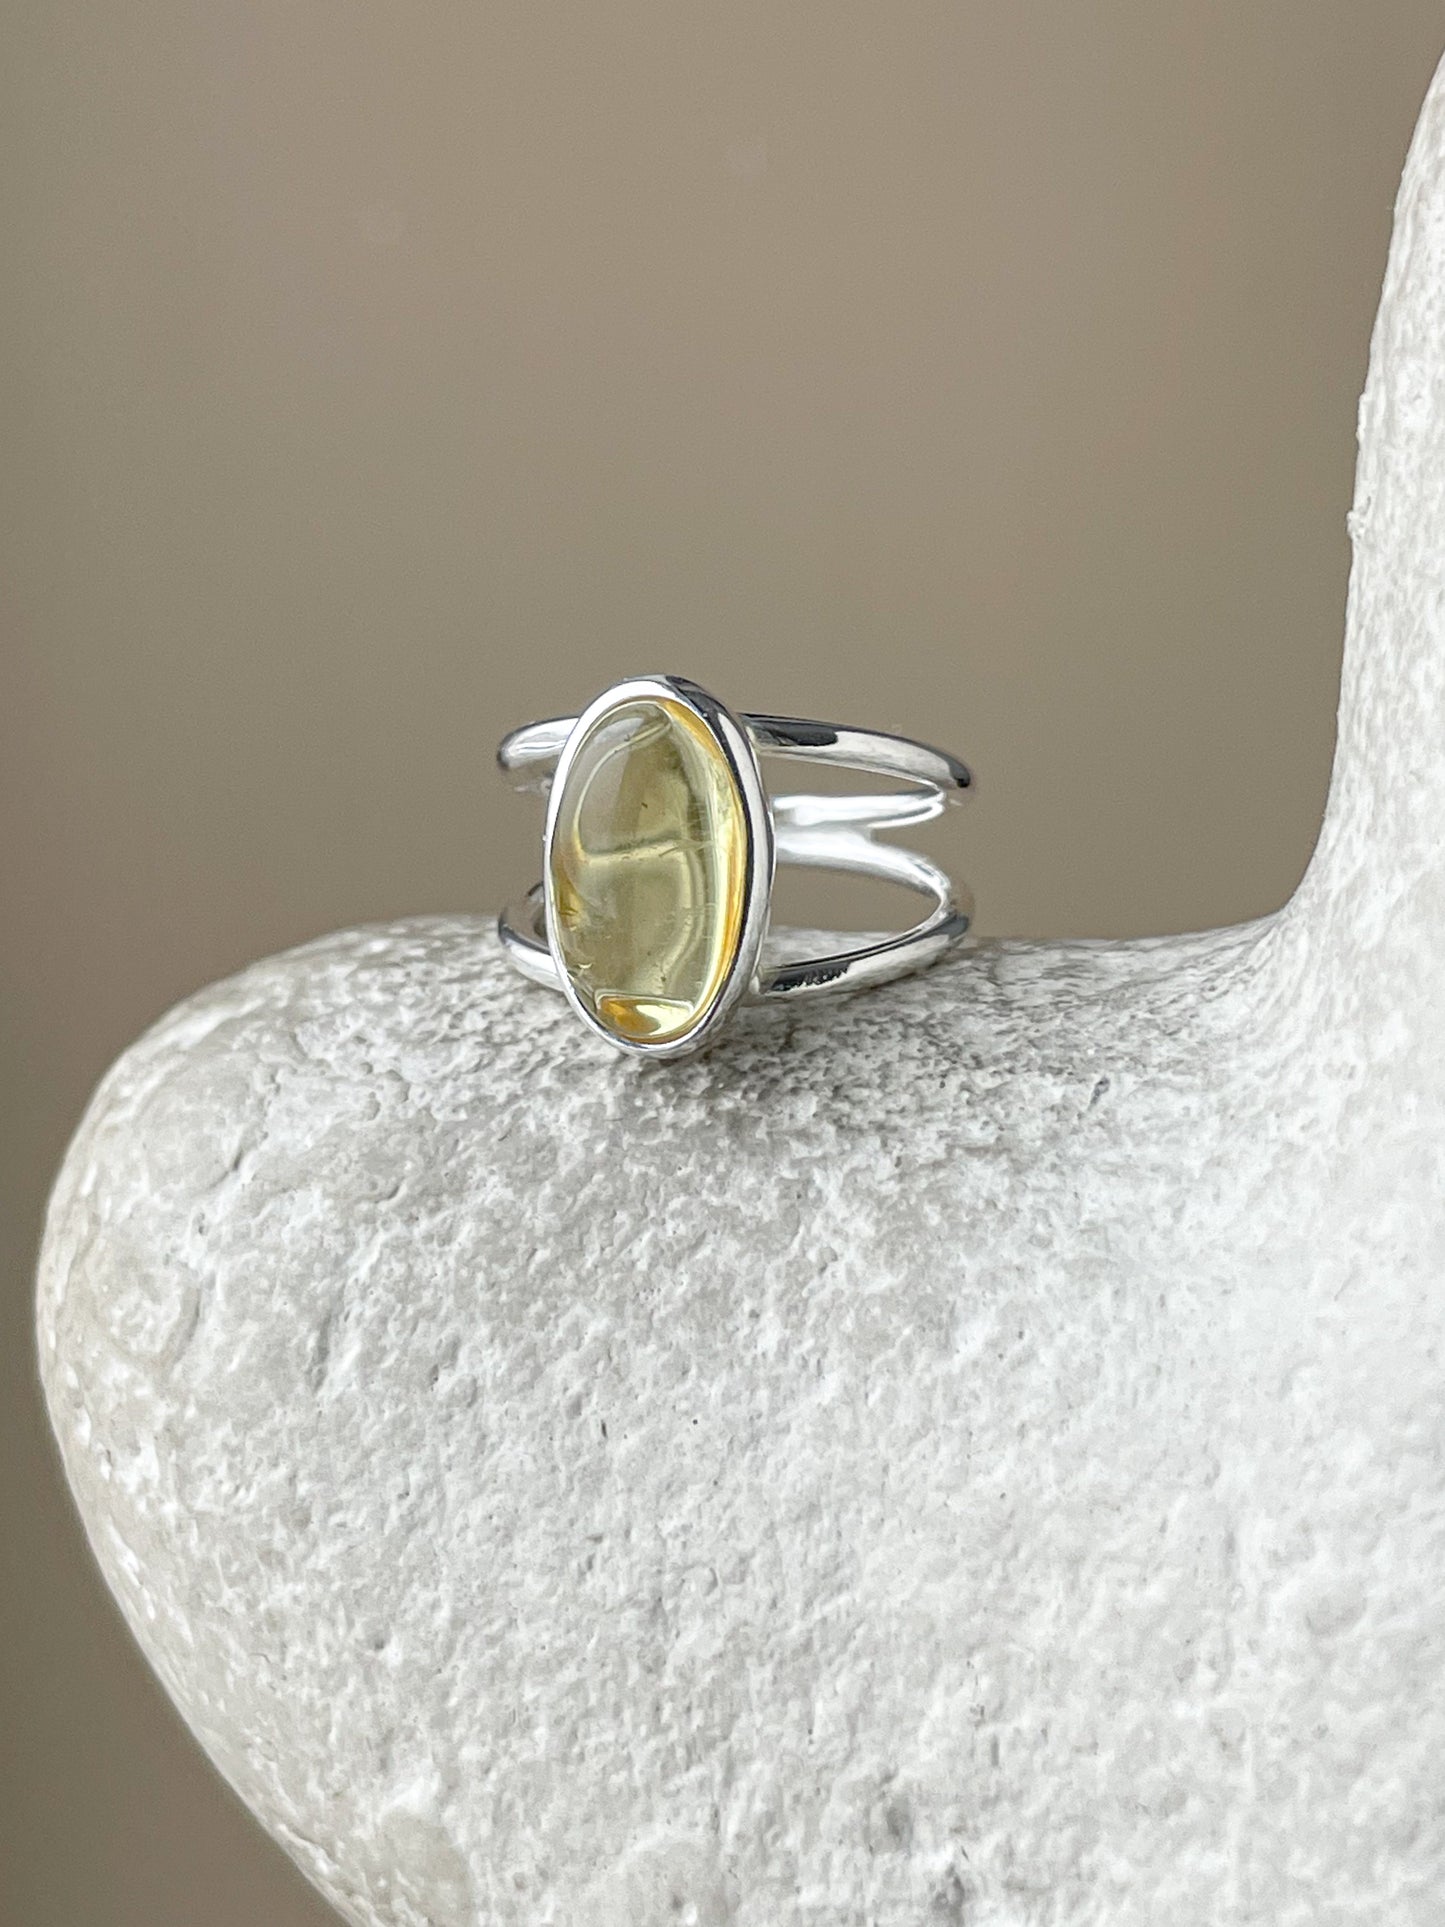 Lemon amber ring - Sterling silver - Handmade ring collection - Size 5 1/2